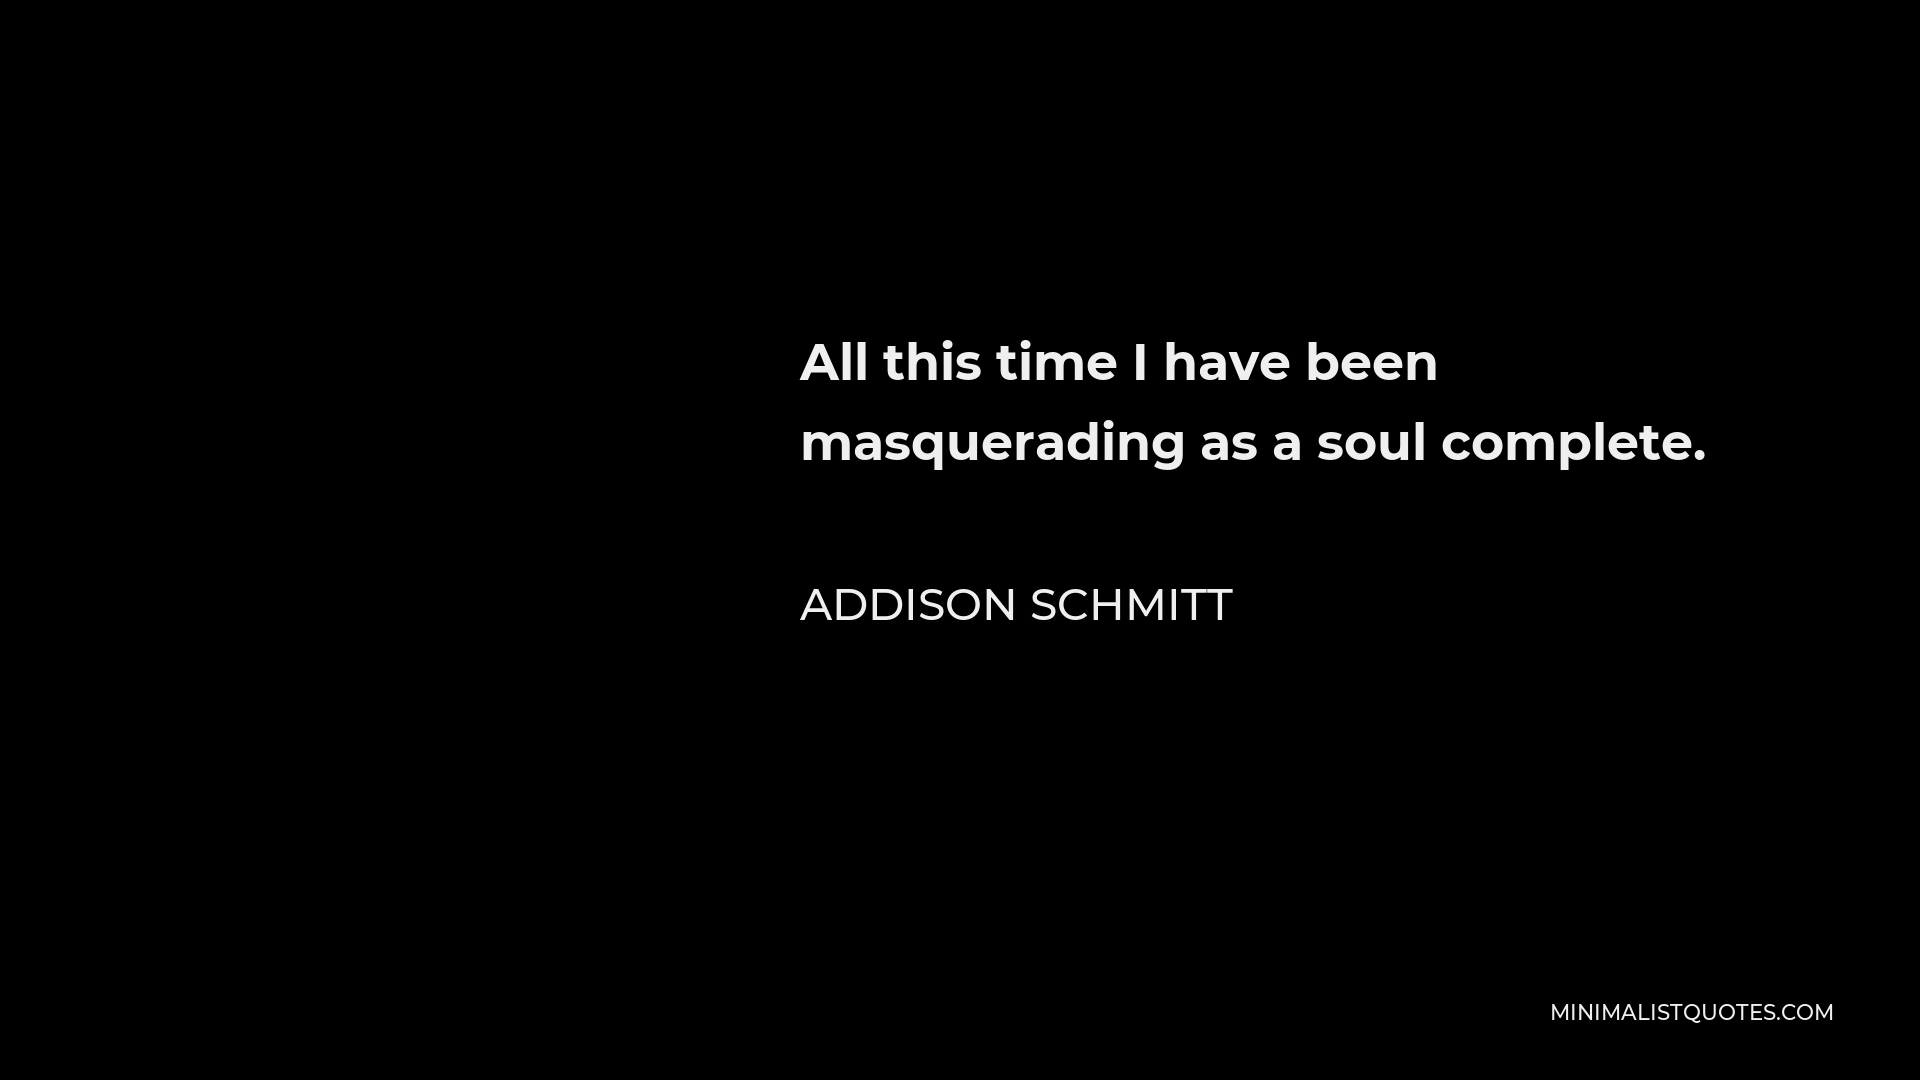 Addison Schmitt Quote - All this time I have been masquerading as a soul complete.